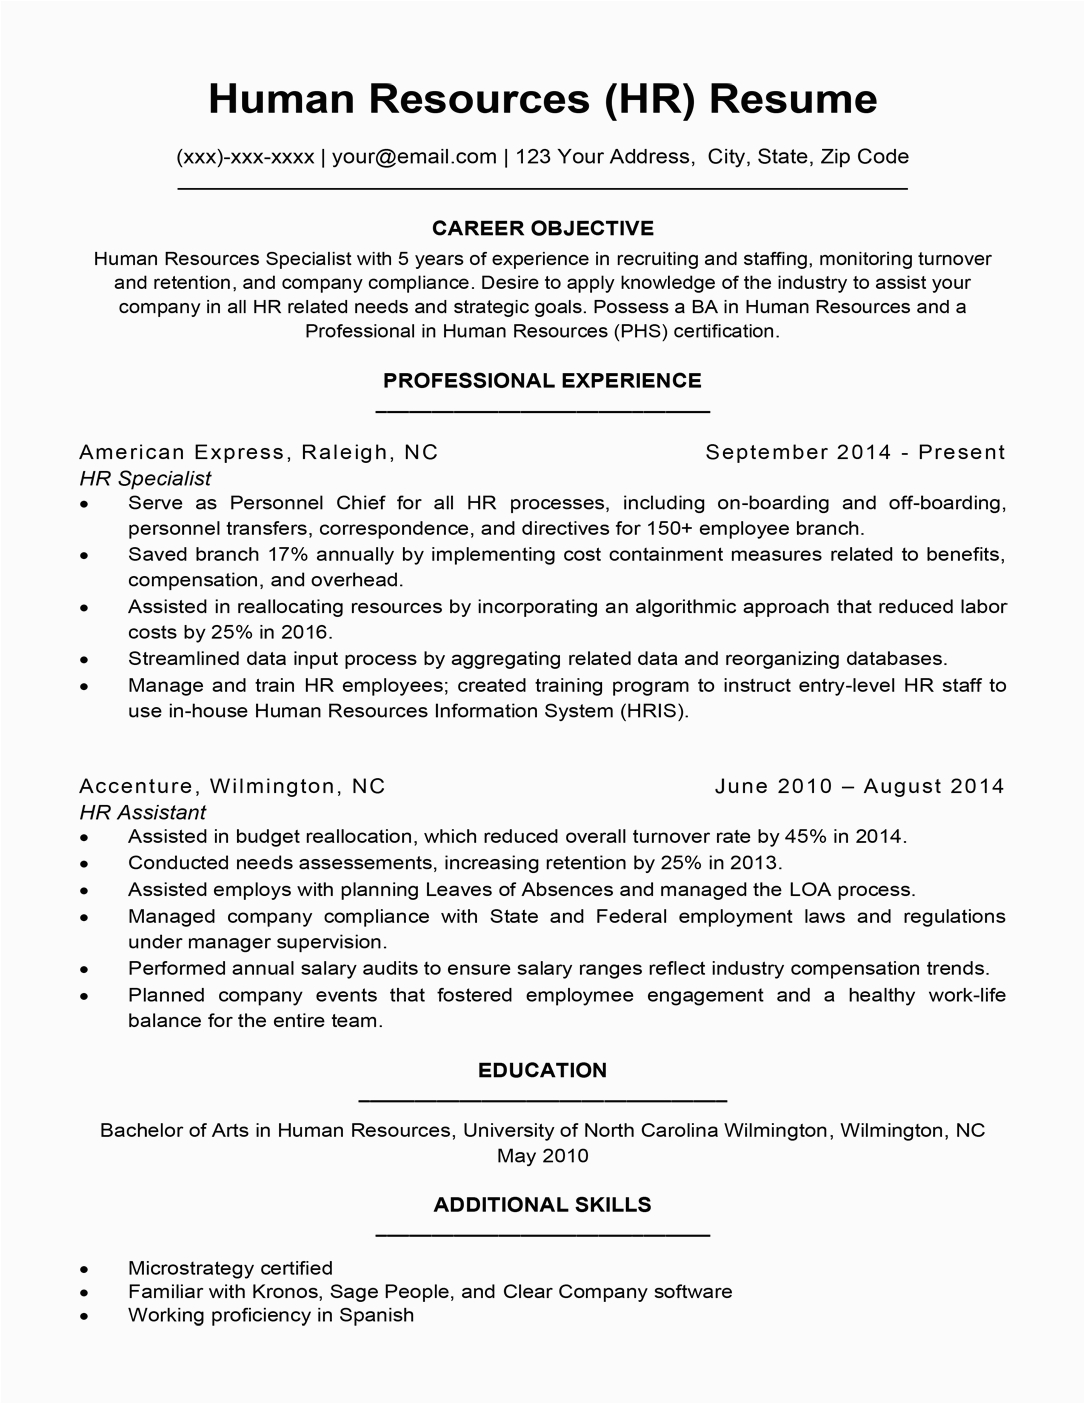 Resume Sample for Human Resource Position Human Resources Resume Sample & Writing Tips